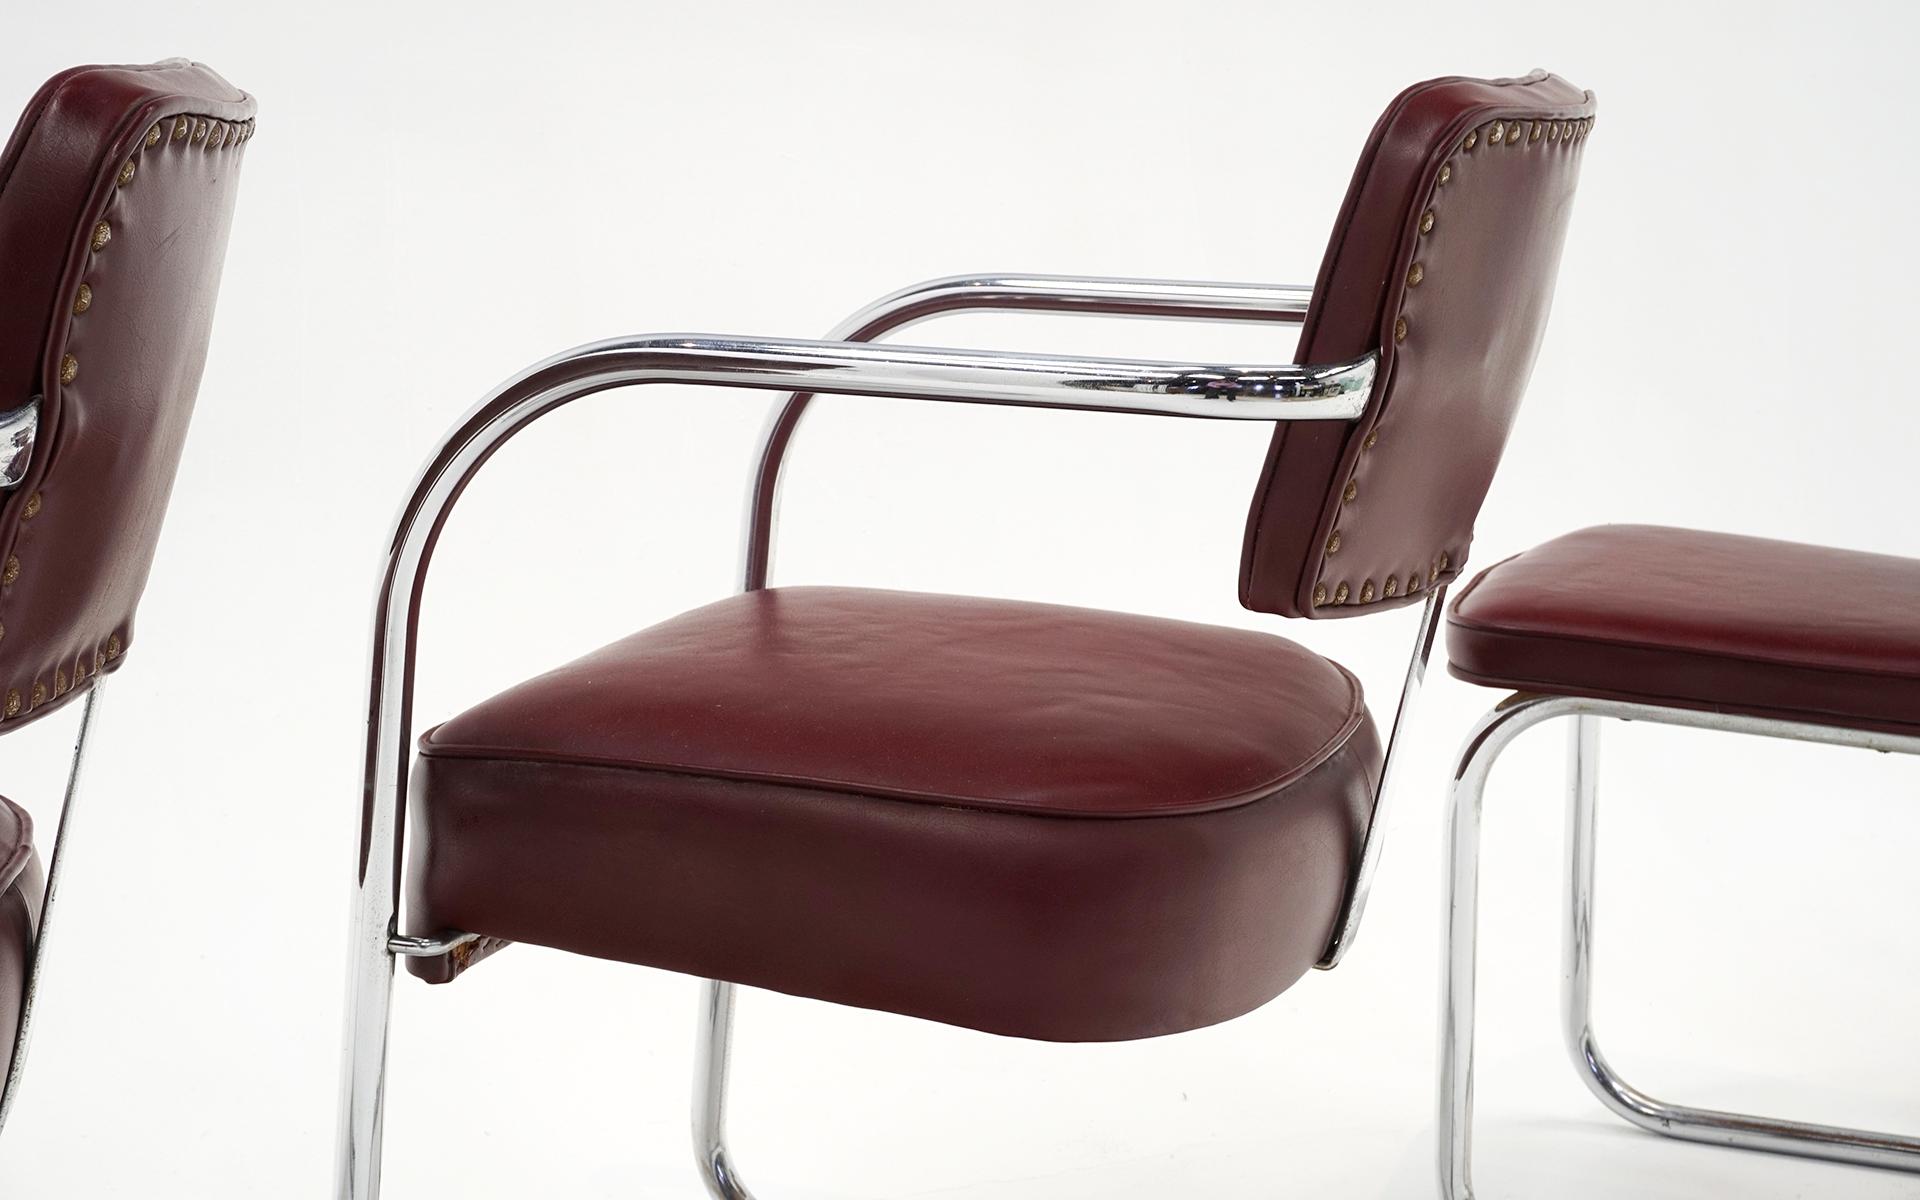 Set of Four 1940s Tubular Chrome Chairs in Original Oxblood Leather like Vinyl For Sale 1